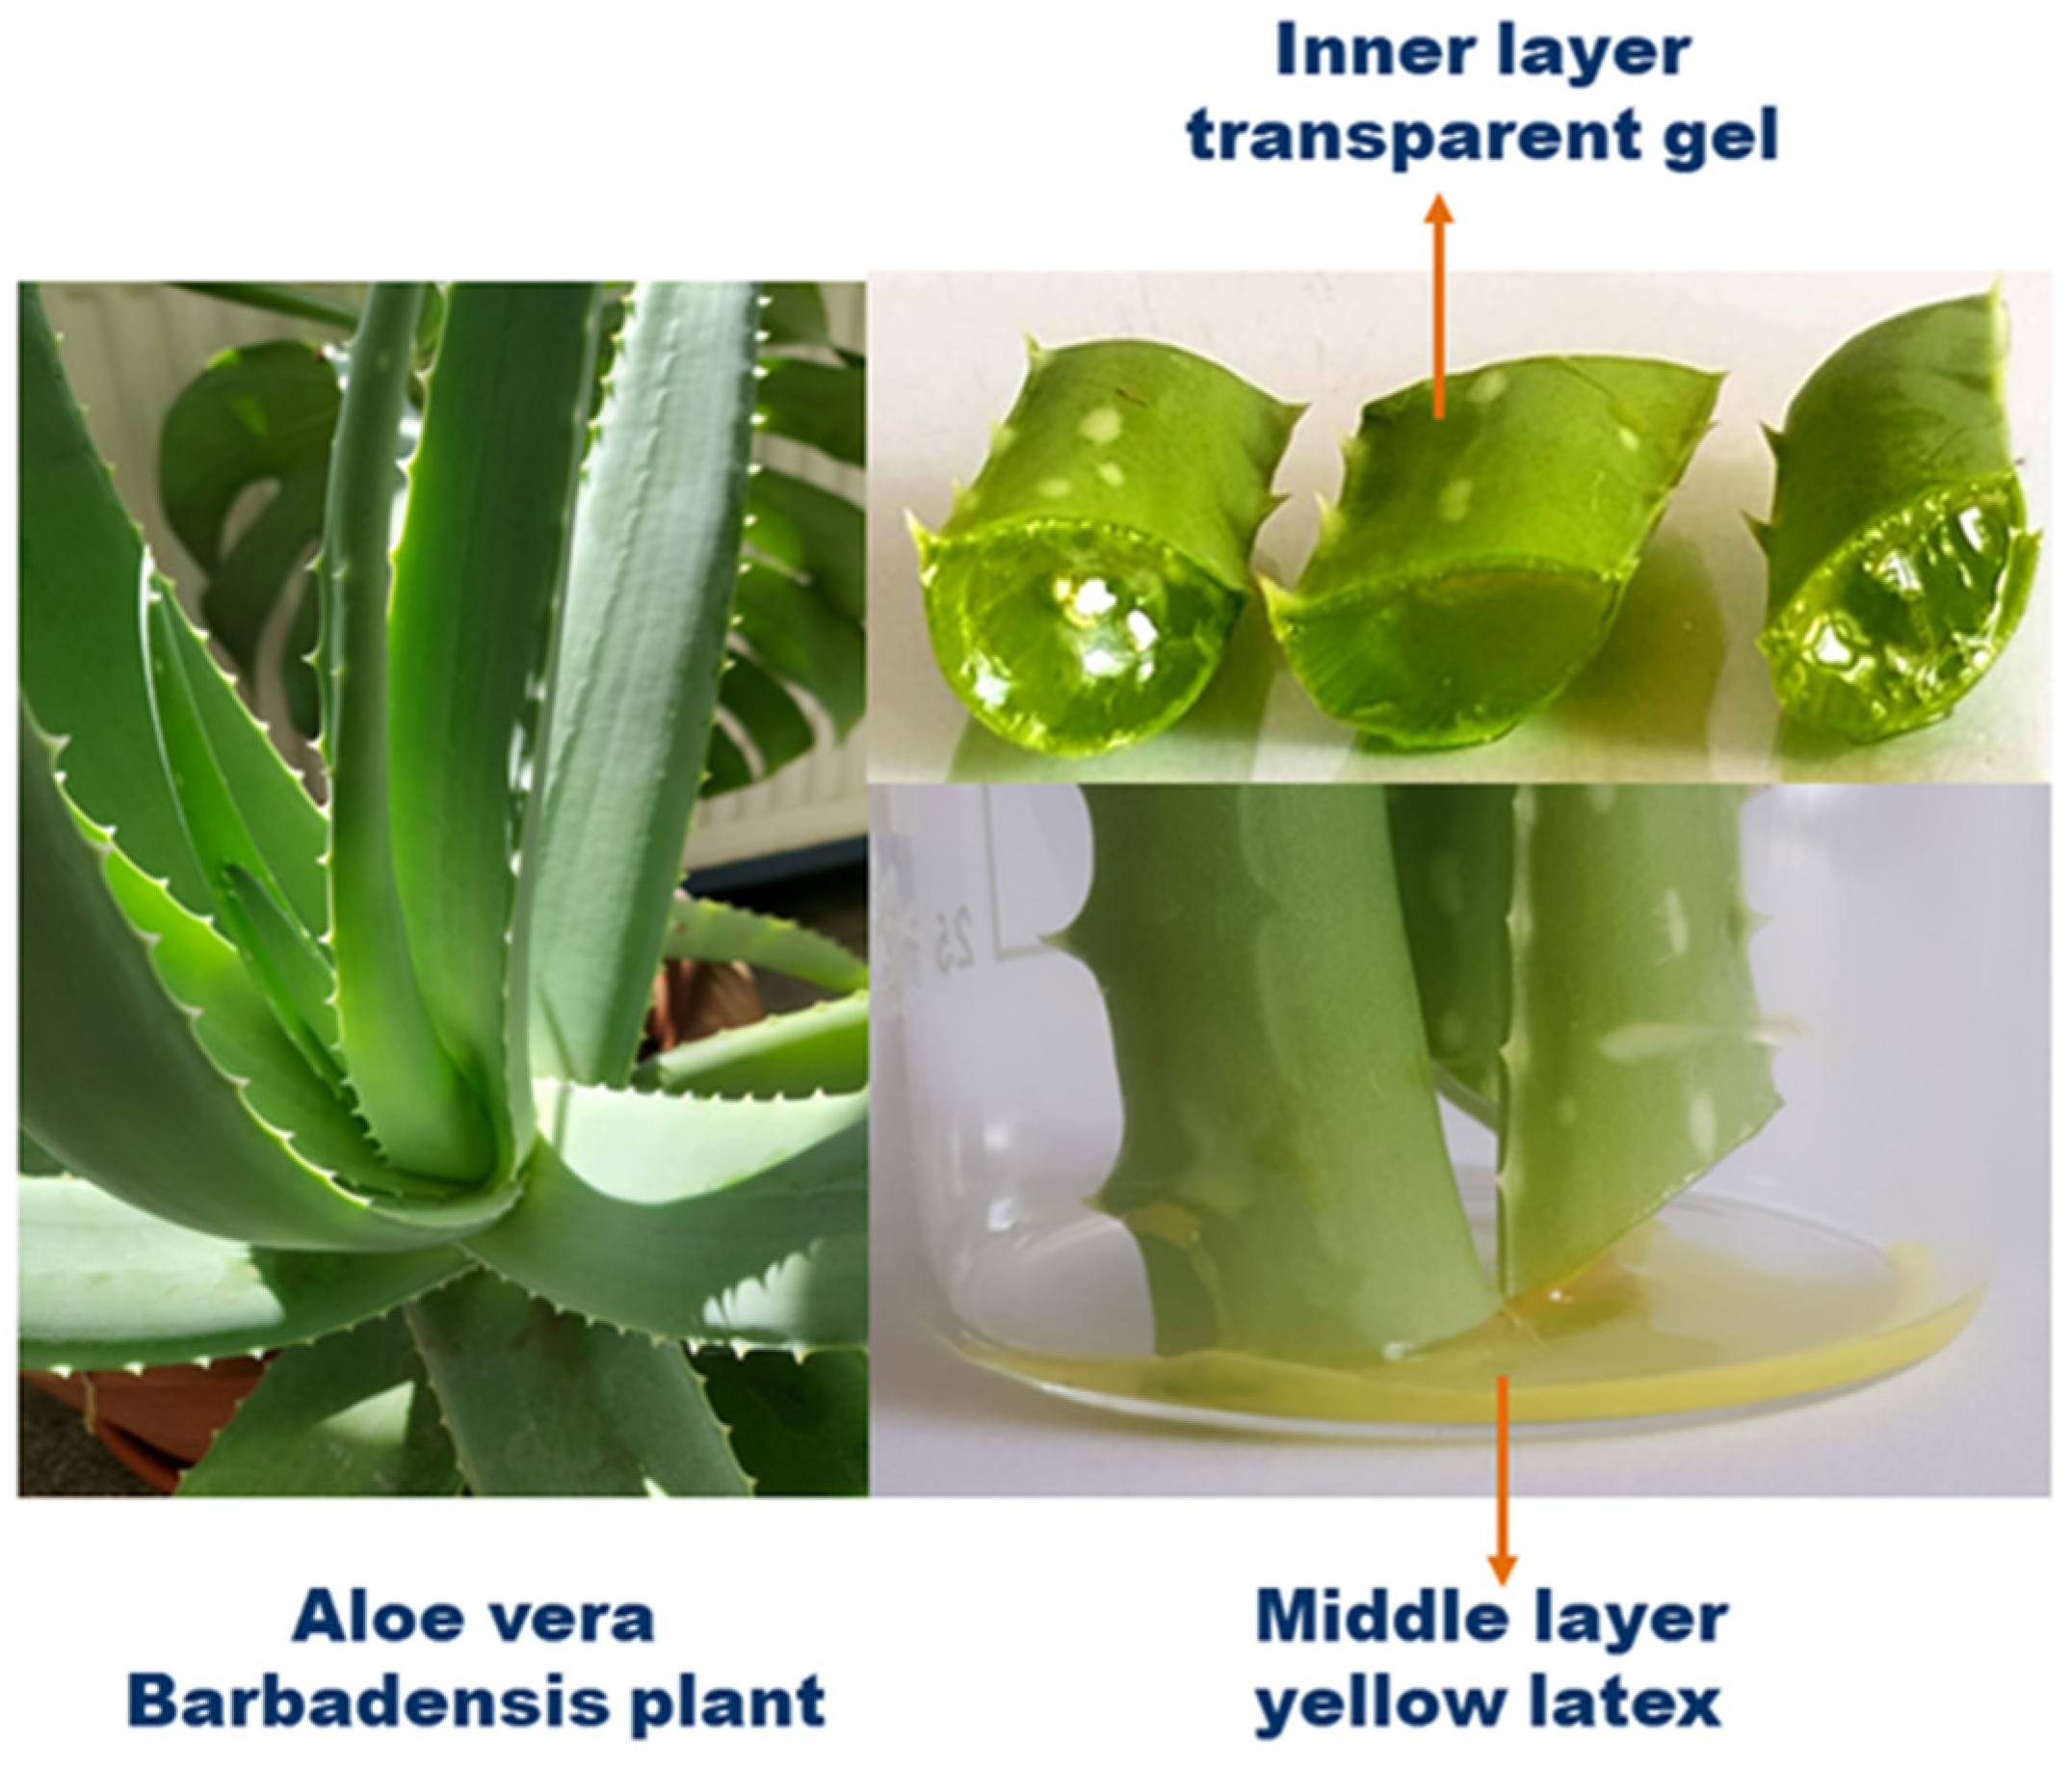 Gels | Full-Text | Aloe vera-Based Hydrogels for Wound Healing: Properties and Therapeutic